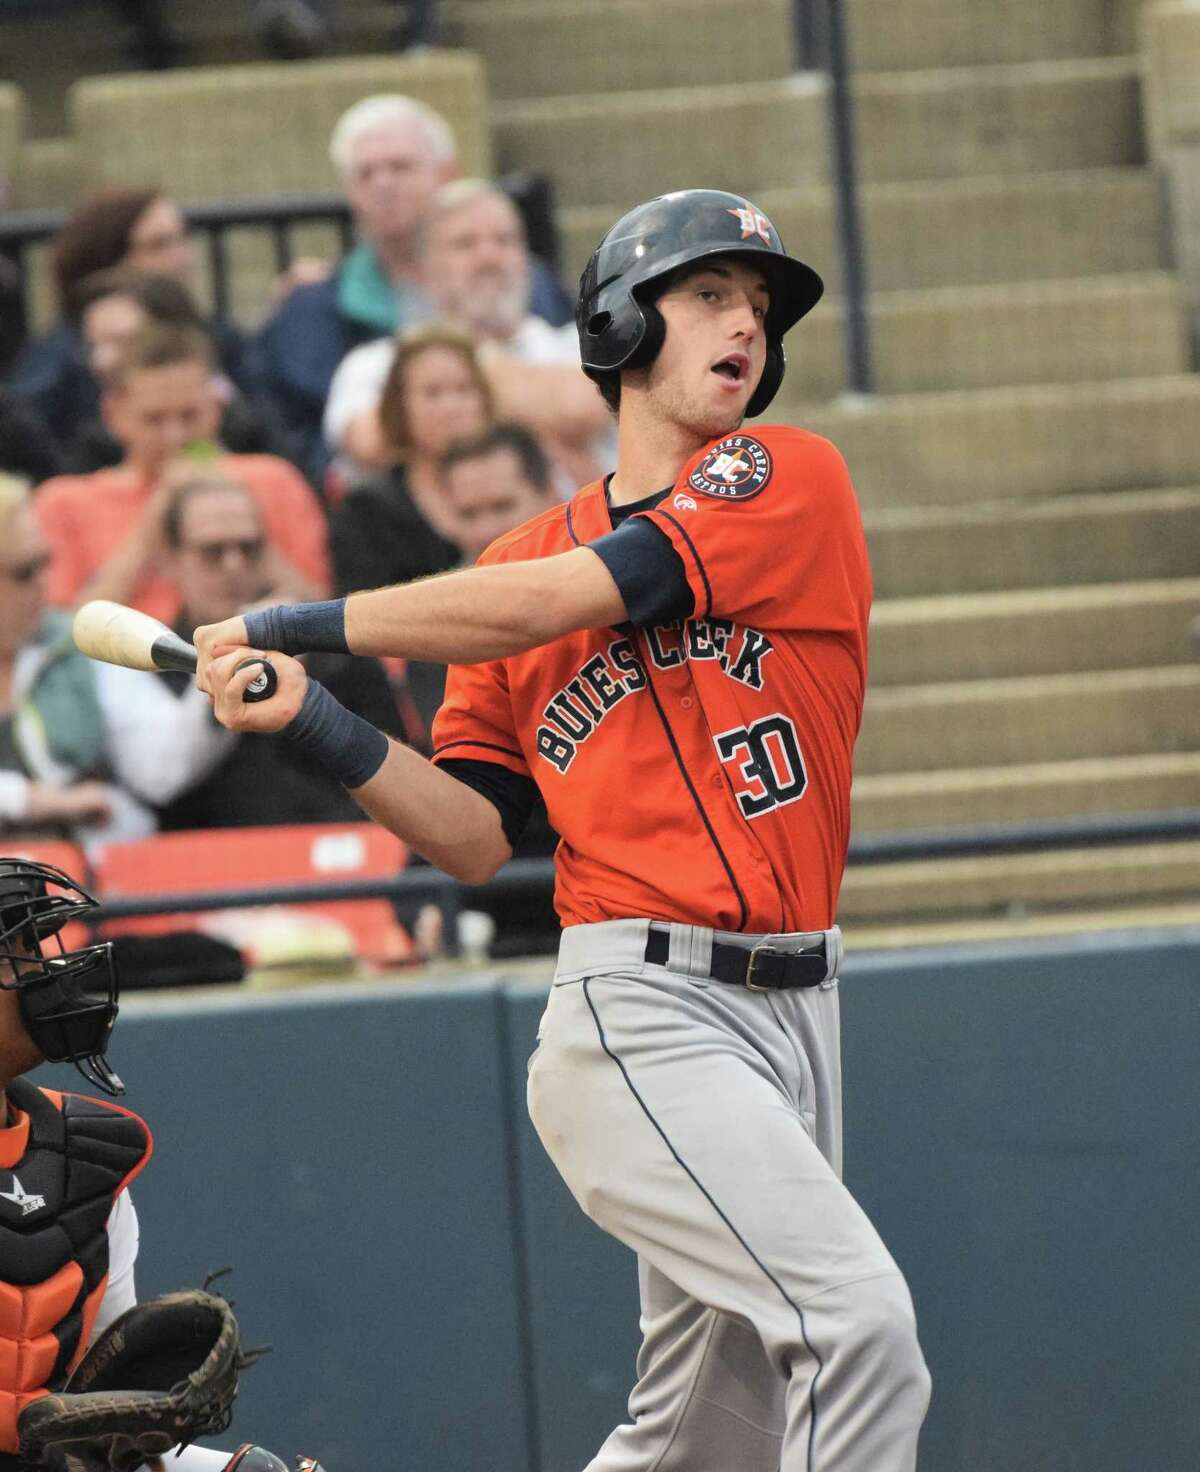 Top Astros prospect Kyle Tucker shined at Buies Creek before his call-up to Corpus Christi.